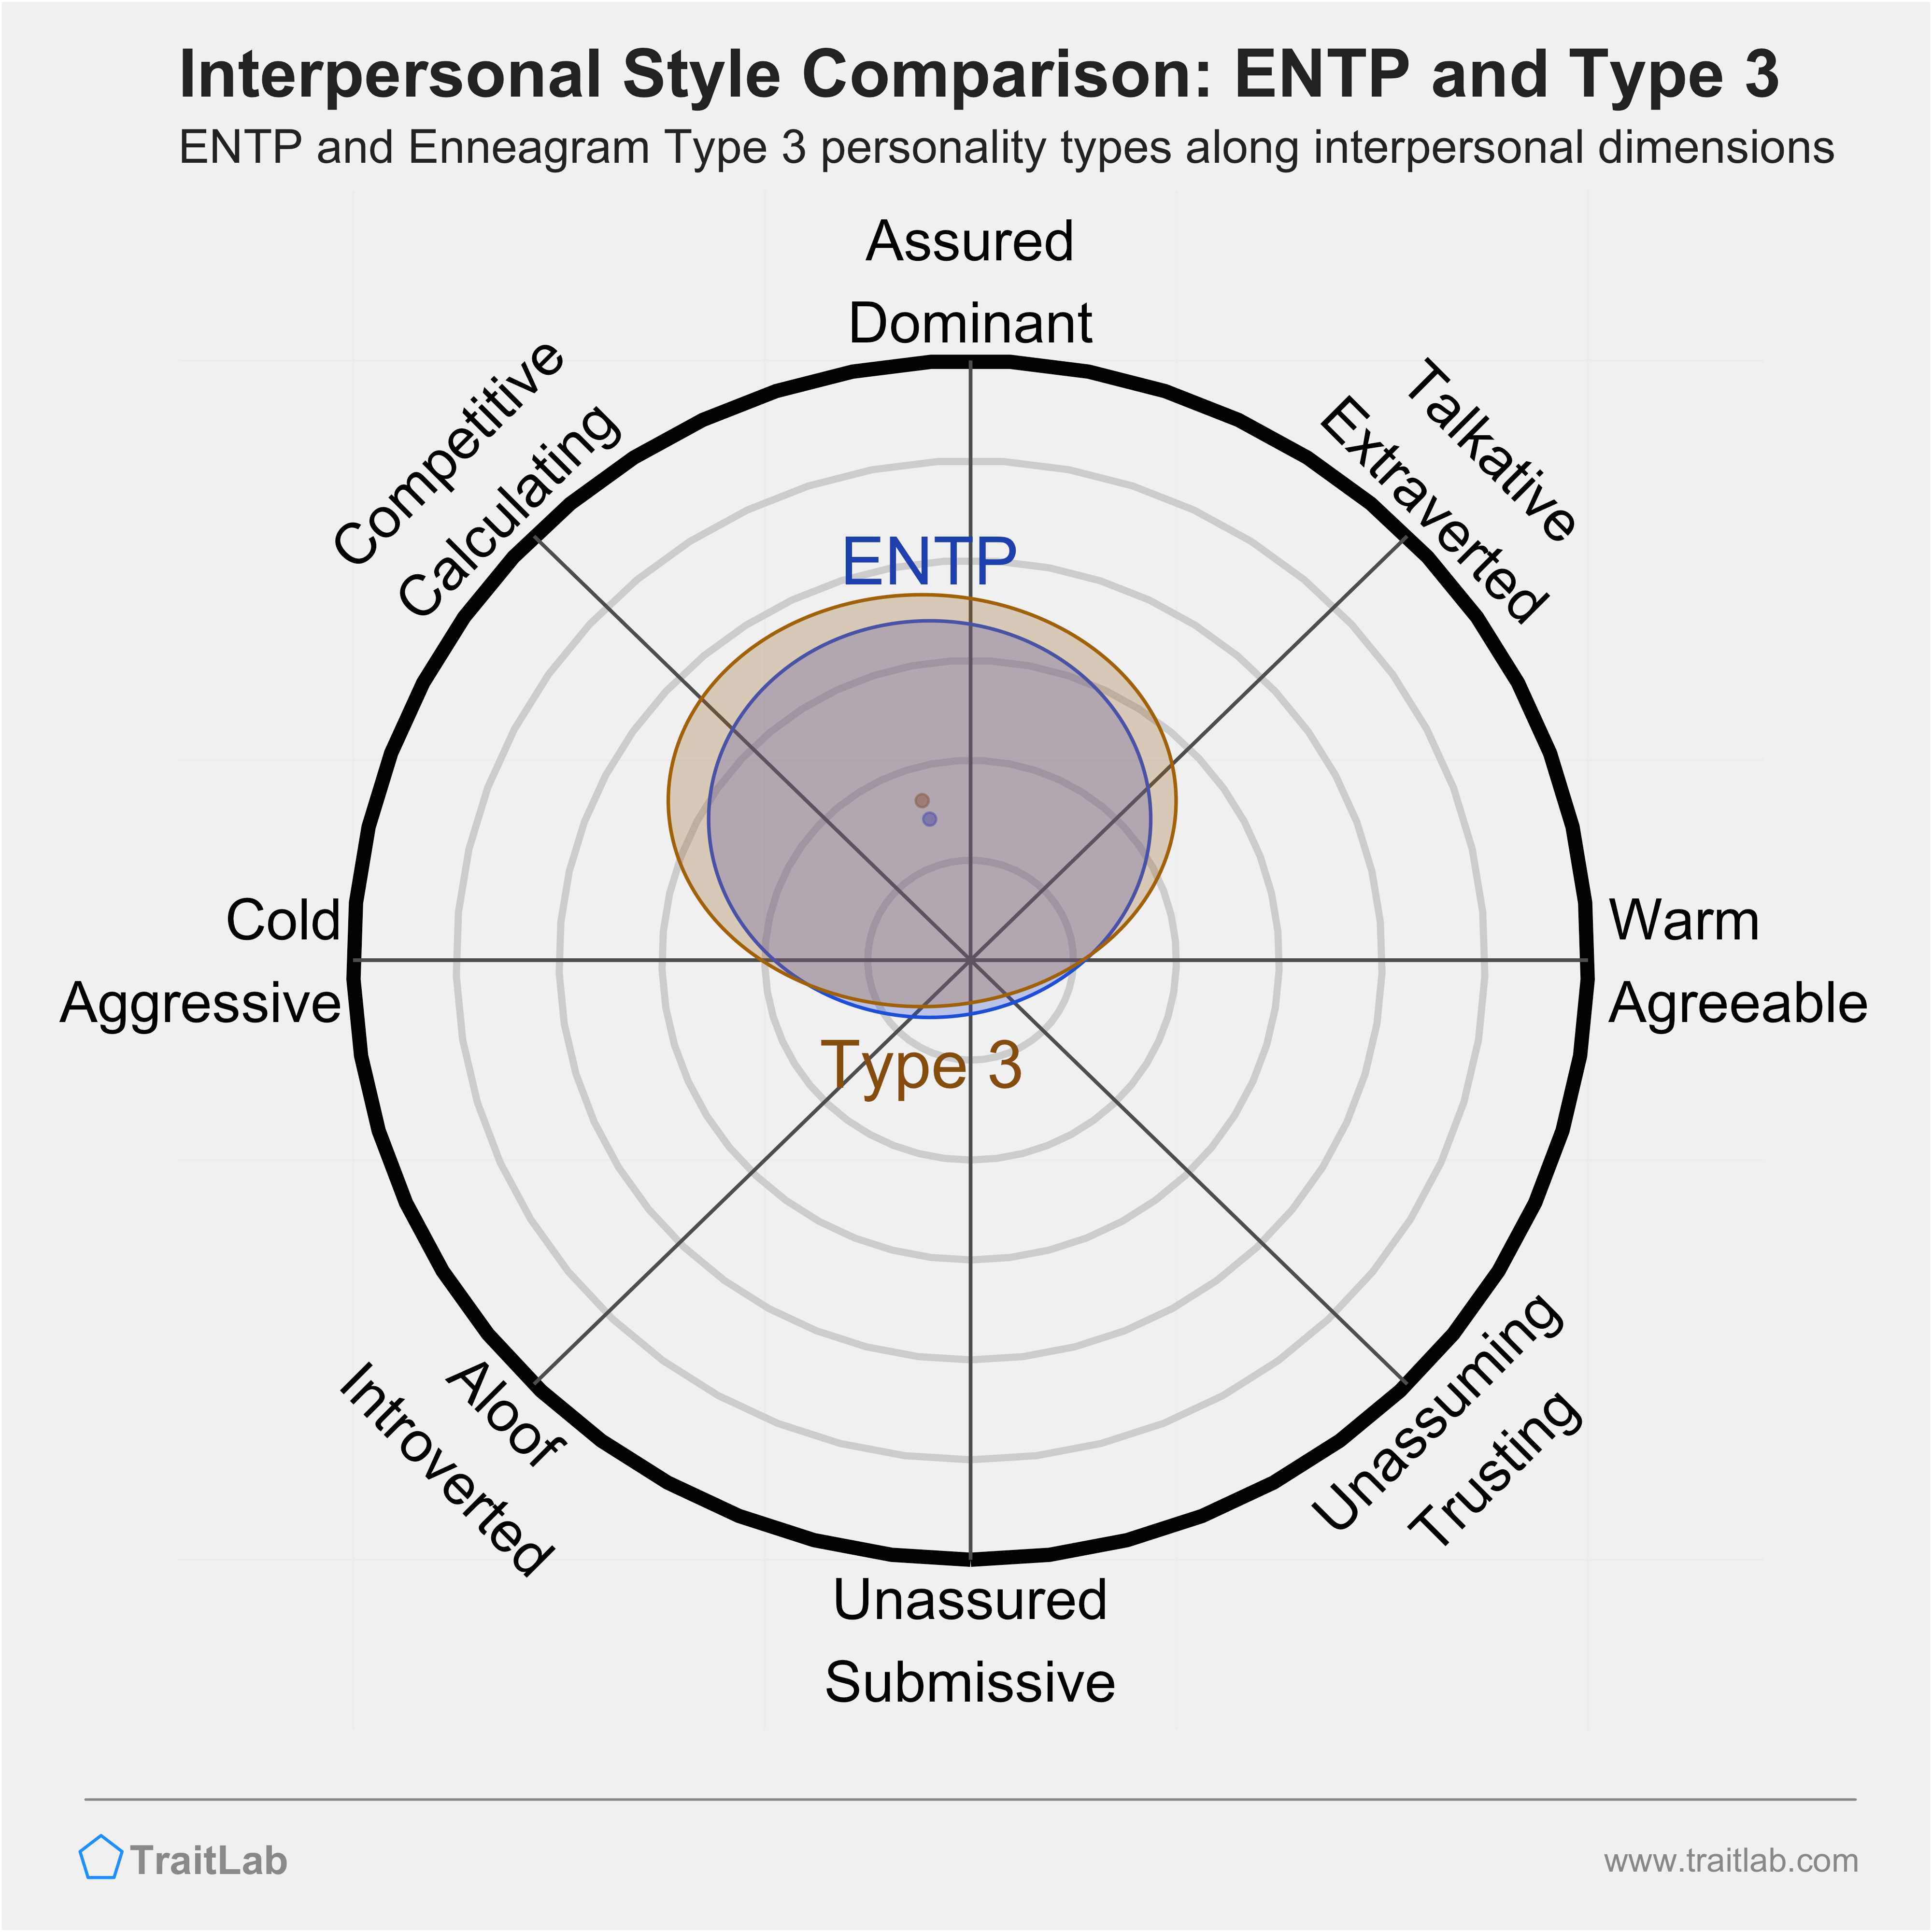 Enneagram ENTP and Type 3 comparison across interpersonal dimensions